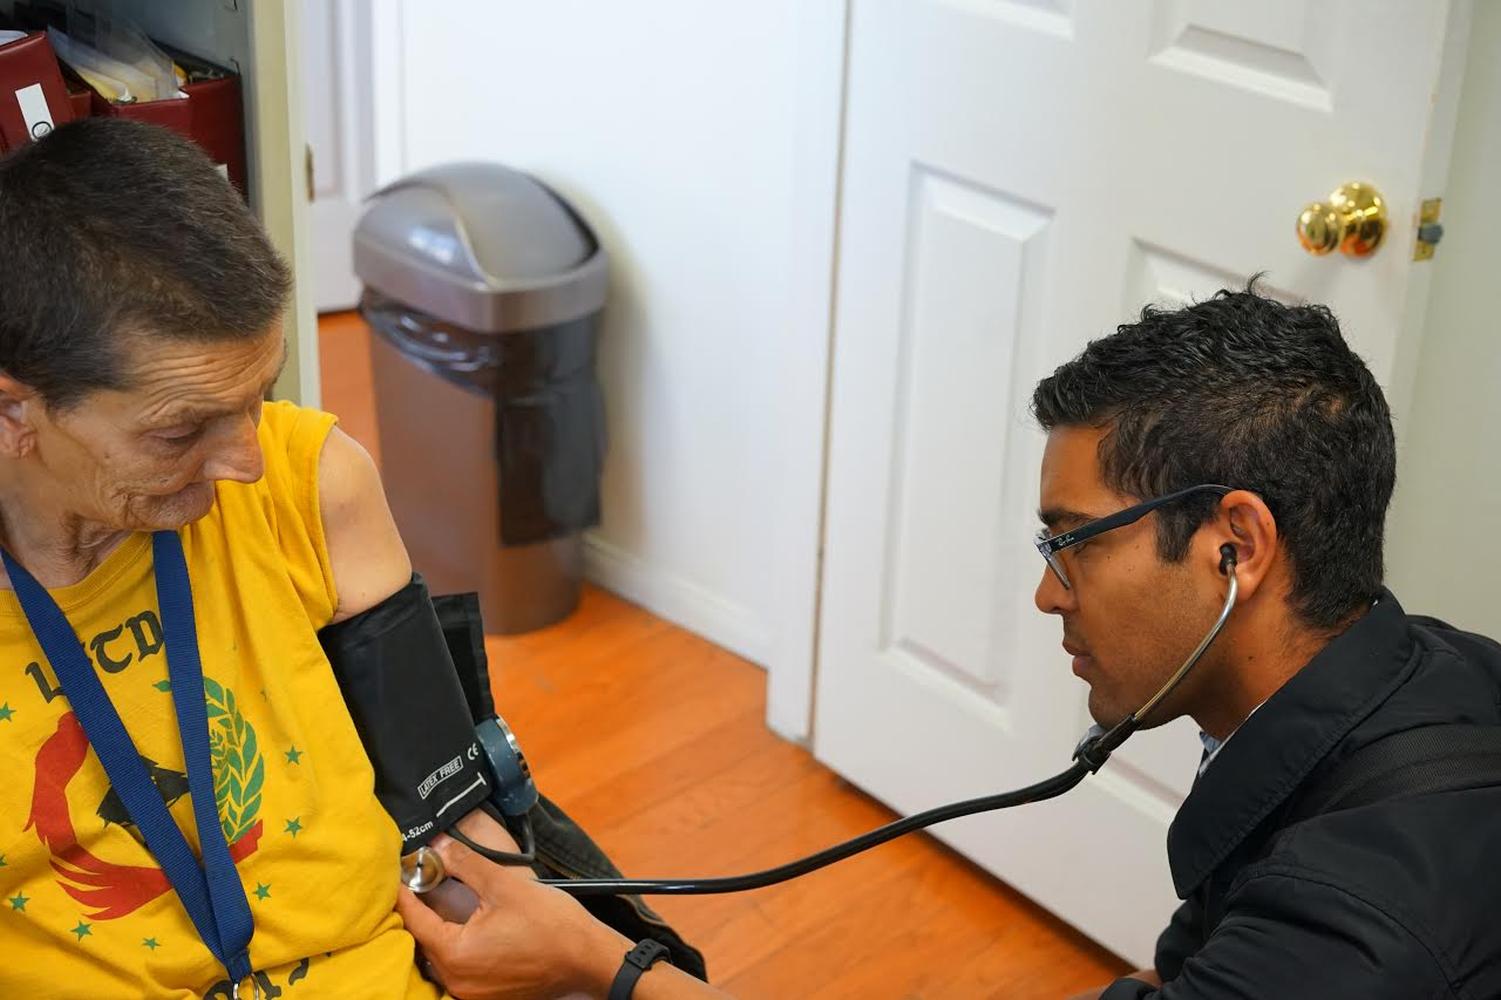 A visiting resident physician checks blood pressure for a patient housed in a Board and Care Facility.  Taken by Dr. Coley King of Venice Family Clinic.